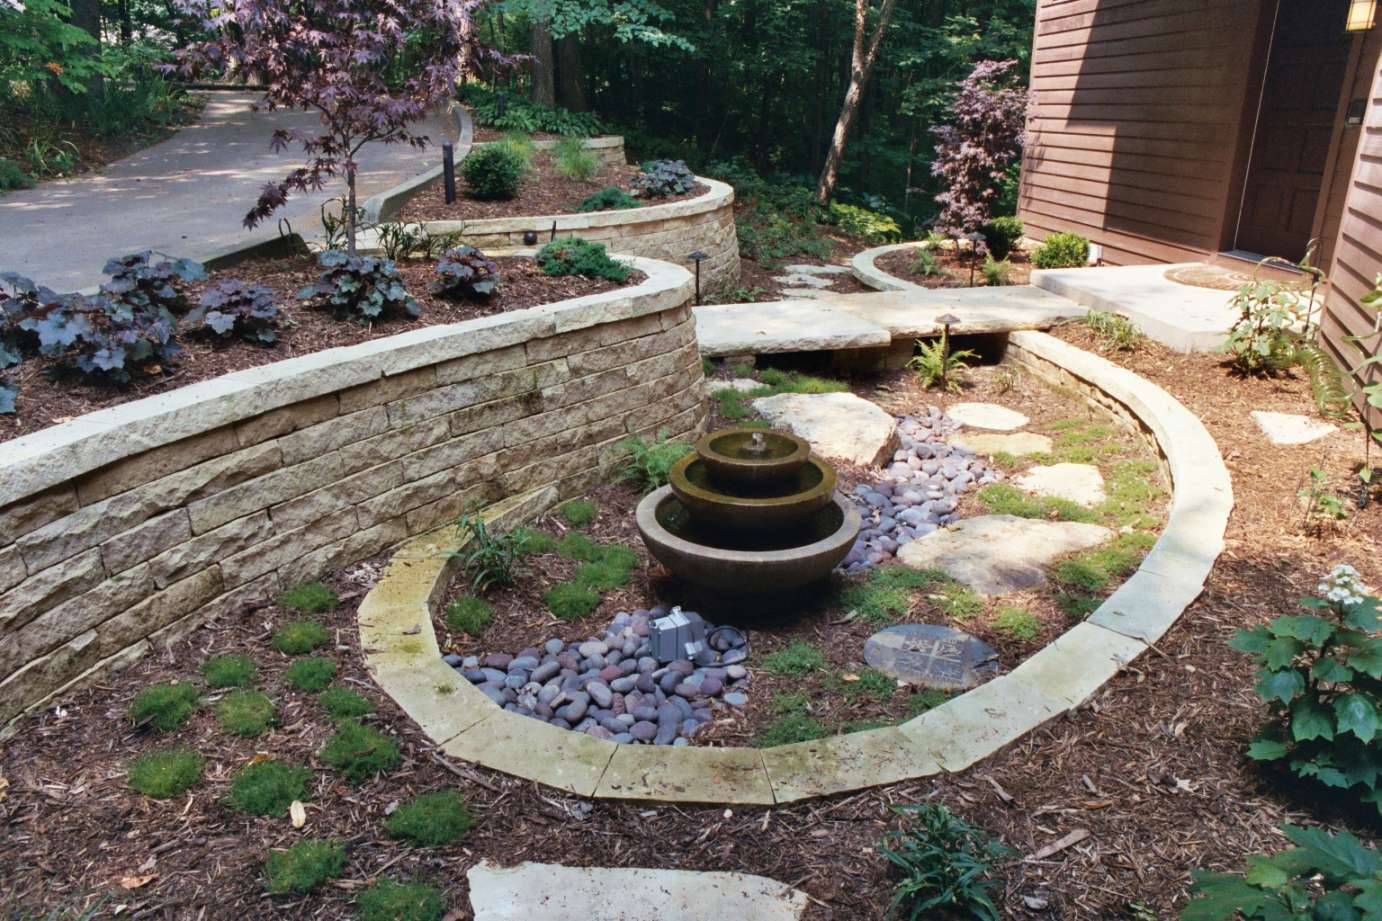 Landscaping & Design — Iowa City Landscaping